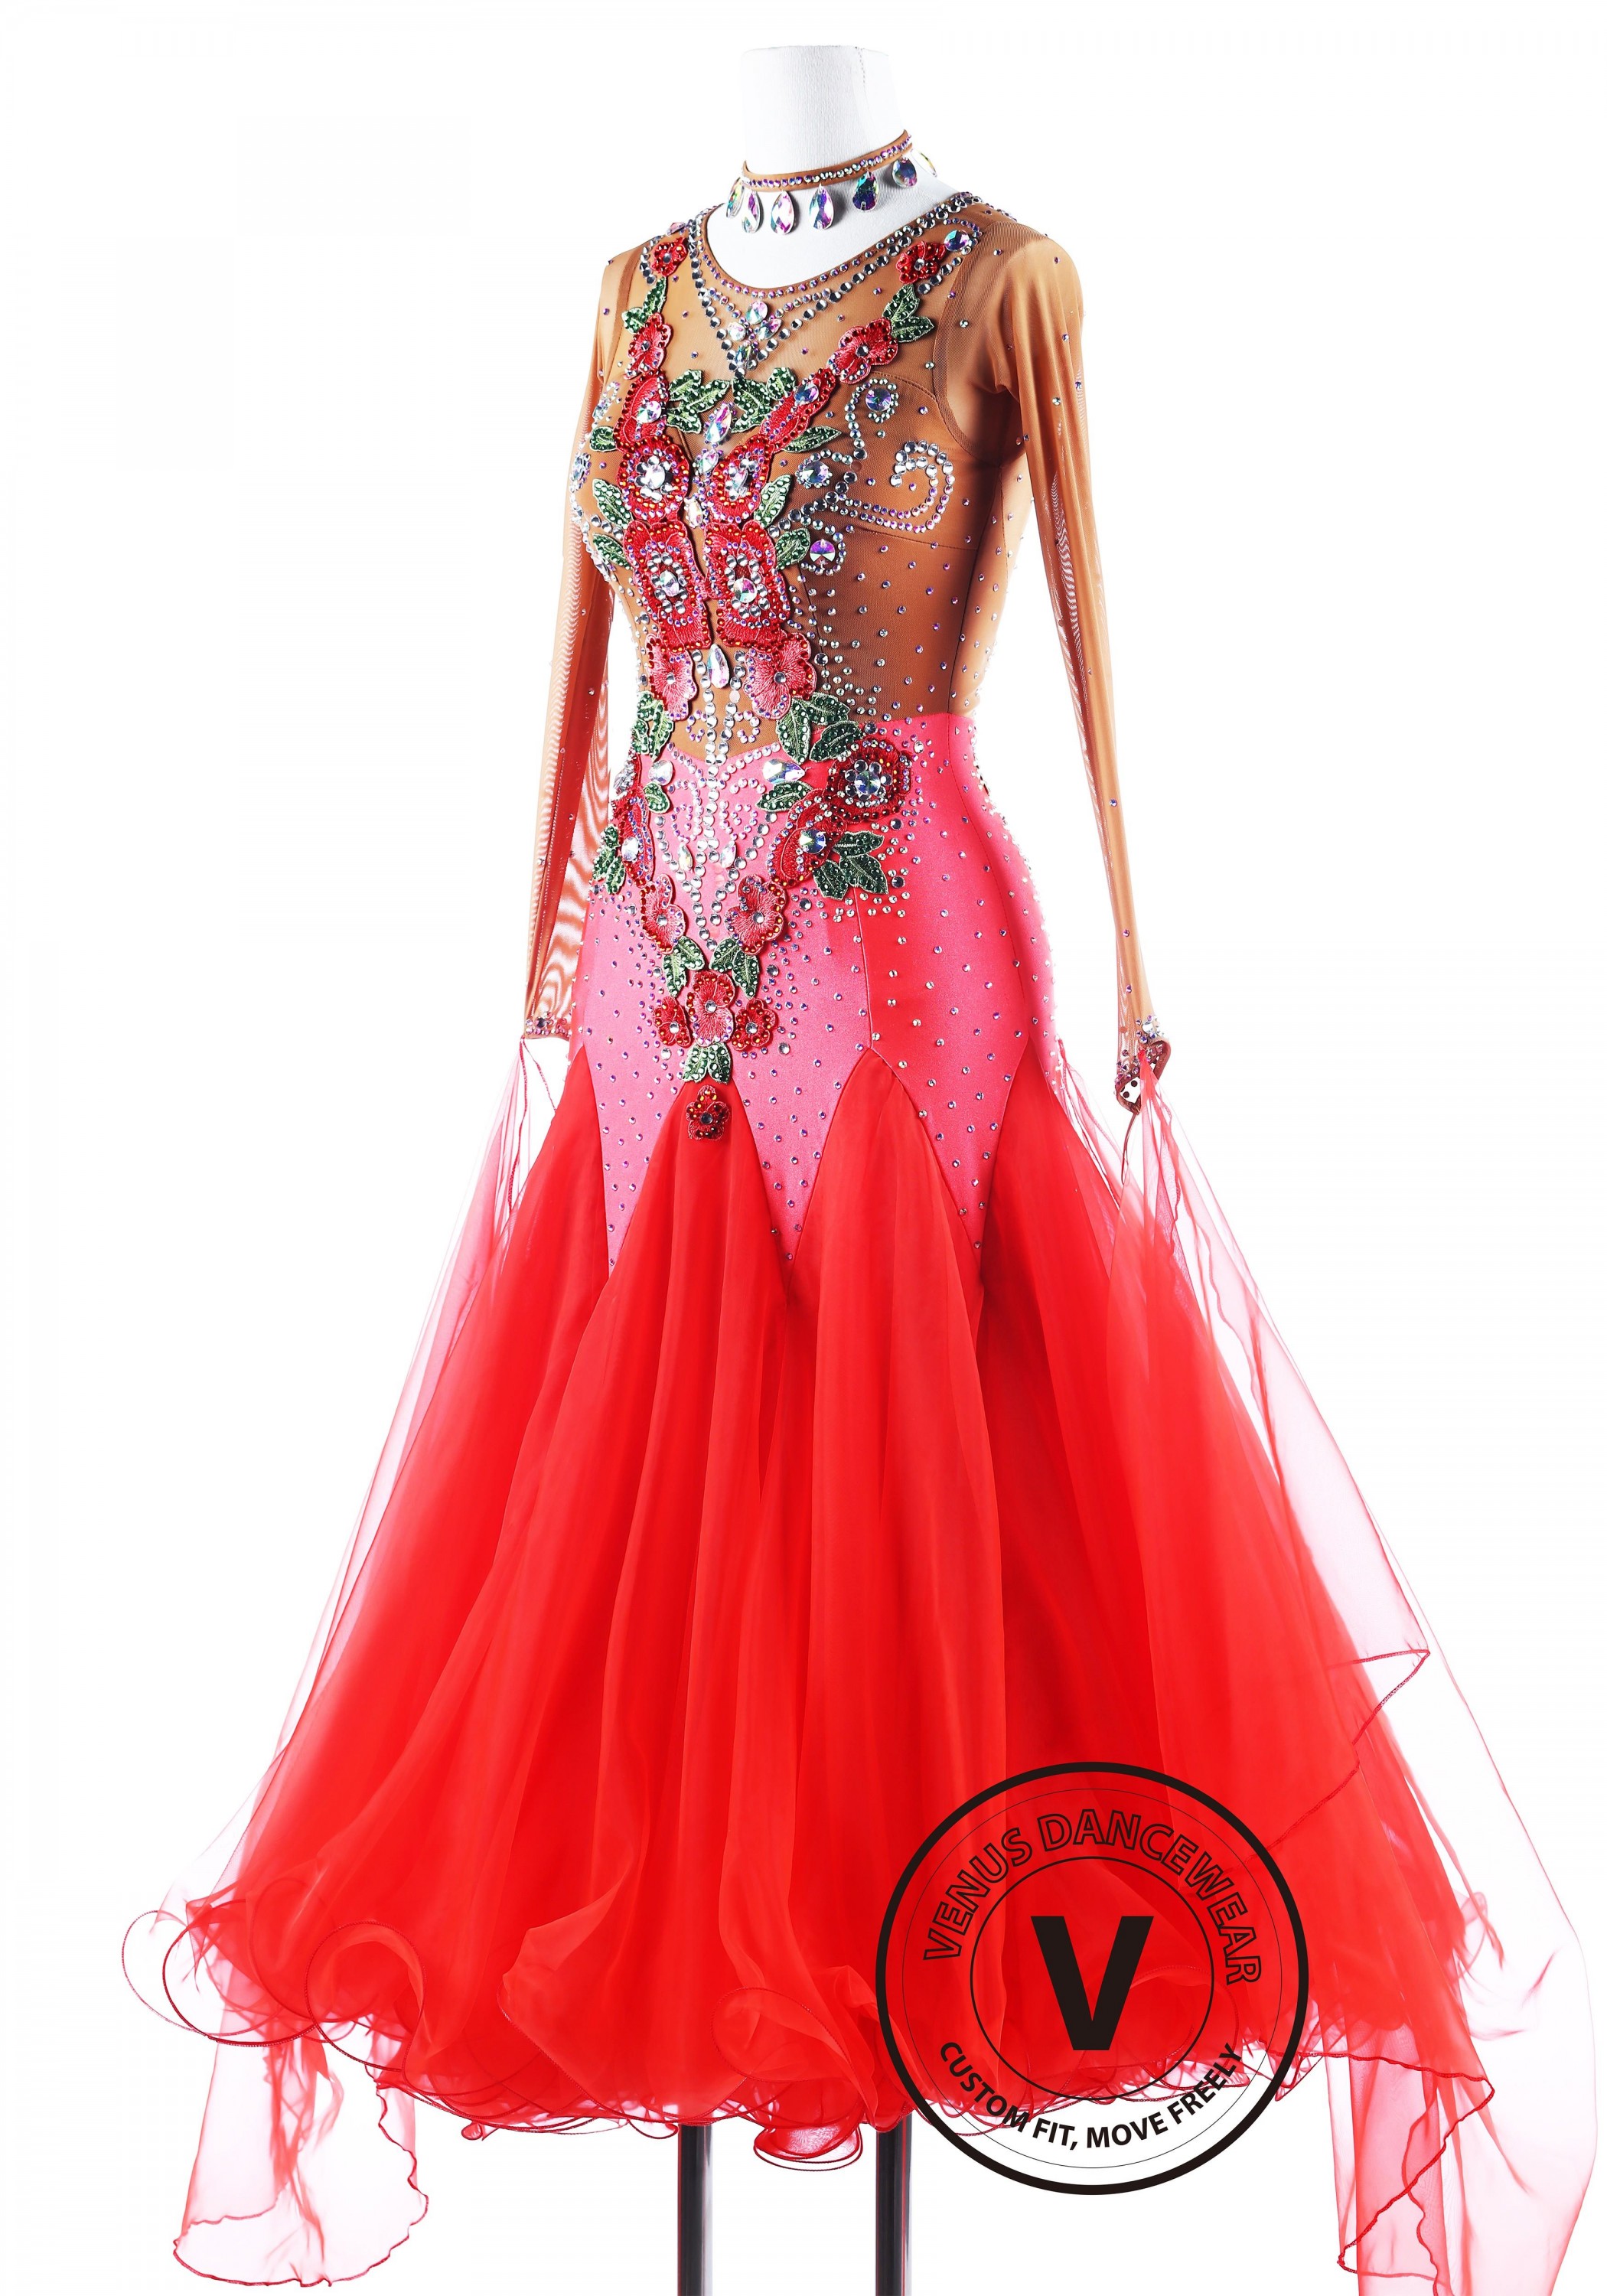 Roses in flames Waltz Competition Ballroom Dance Dress